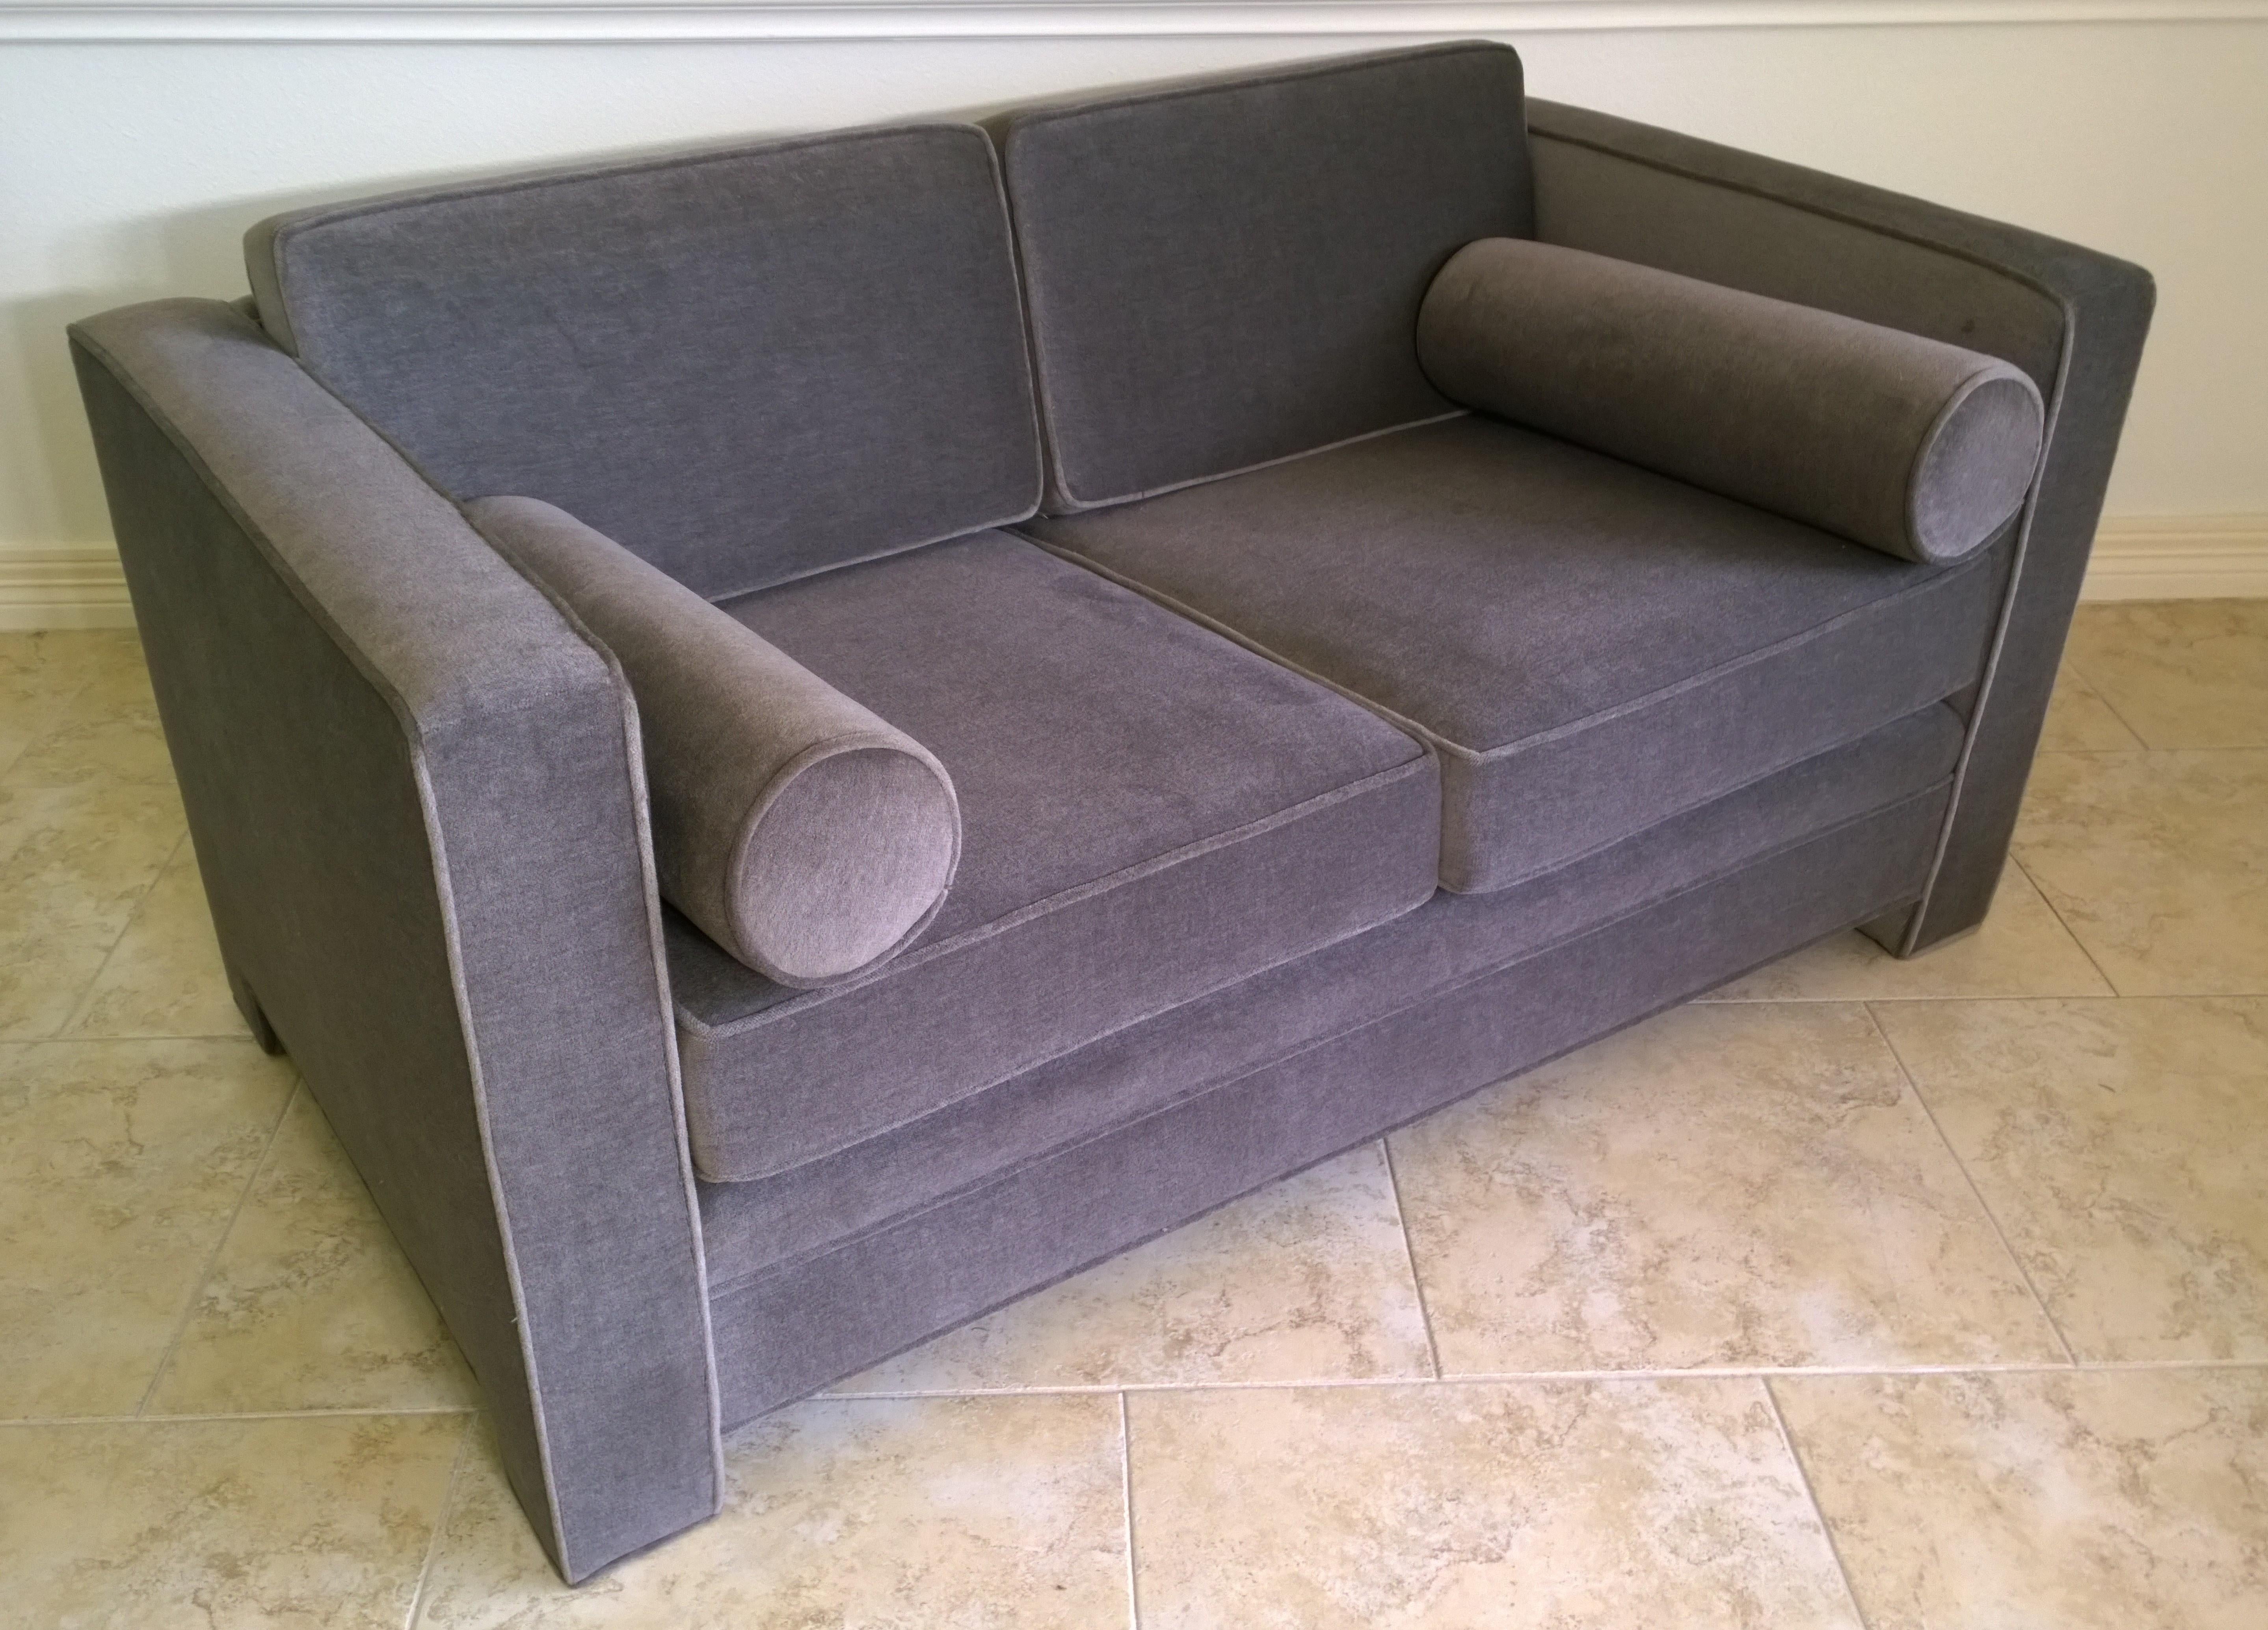 Offered is a Mid-Century Modern Milo Baughman style newly upholstered mohair wool tuxedo love seat in a warm gray / taupe color way. The piece is a two-seat sofa with two-seat cushions and two back cushions and two rolled armrest cushions. The sofa